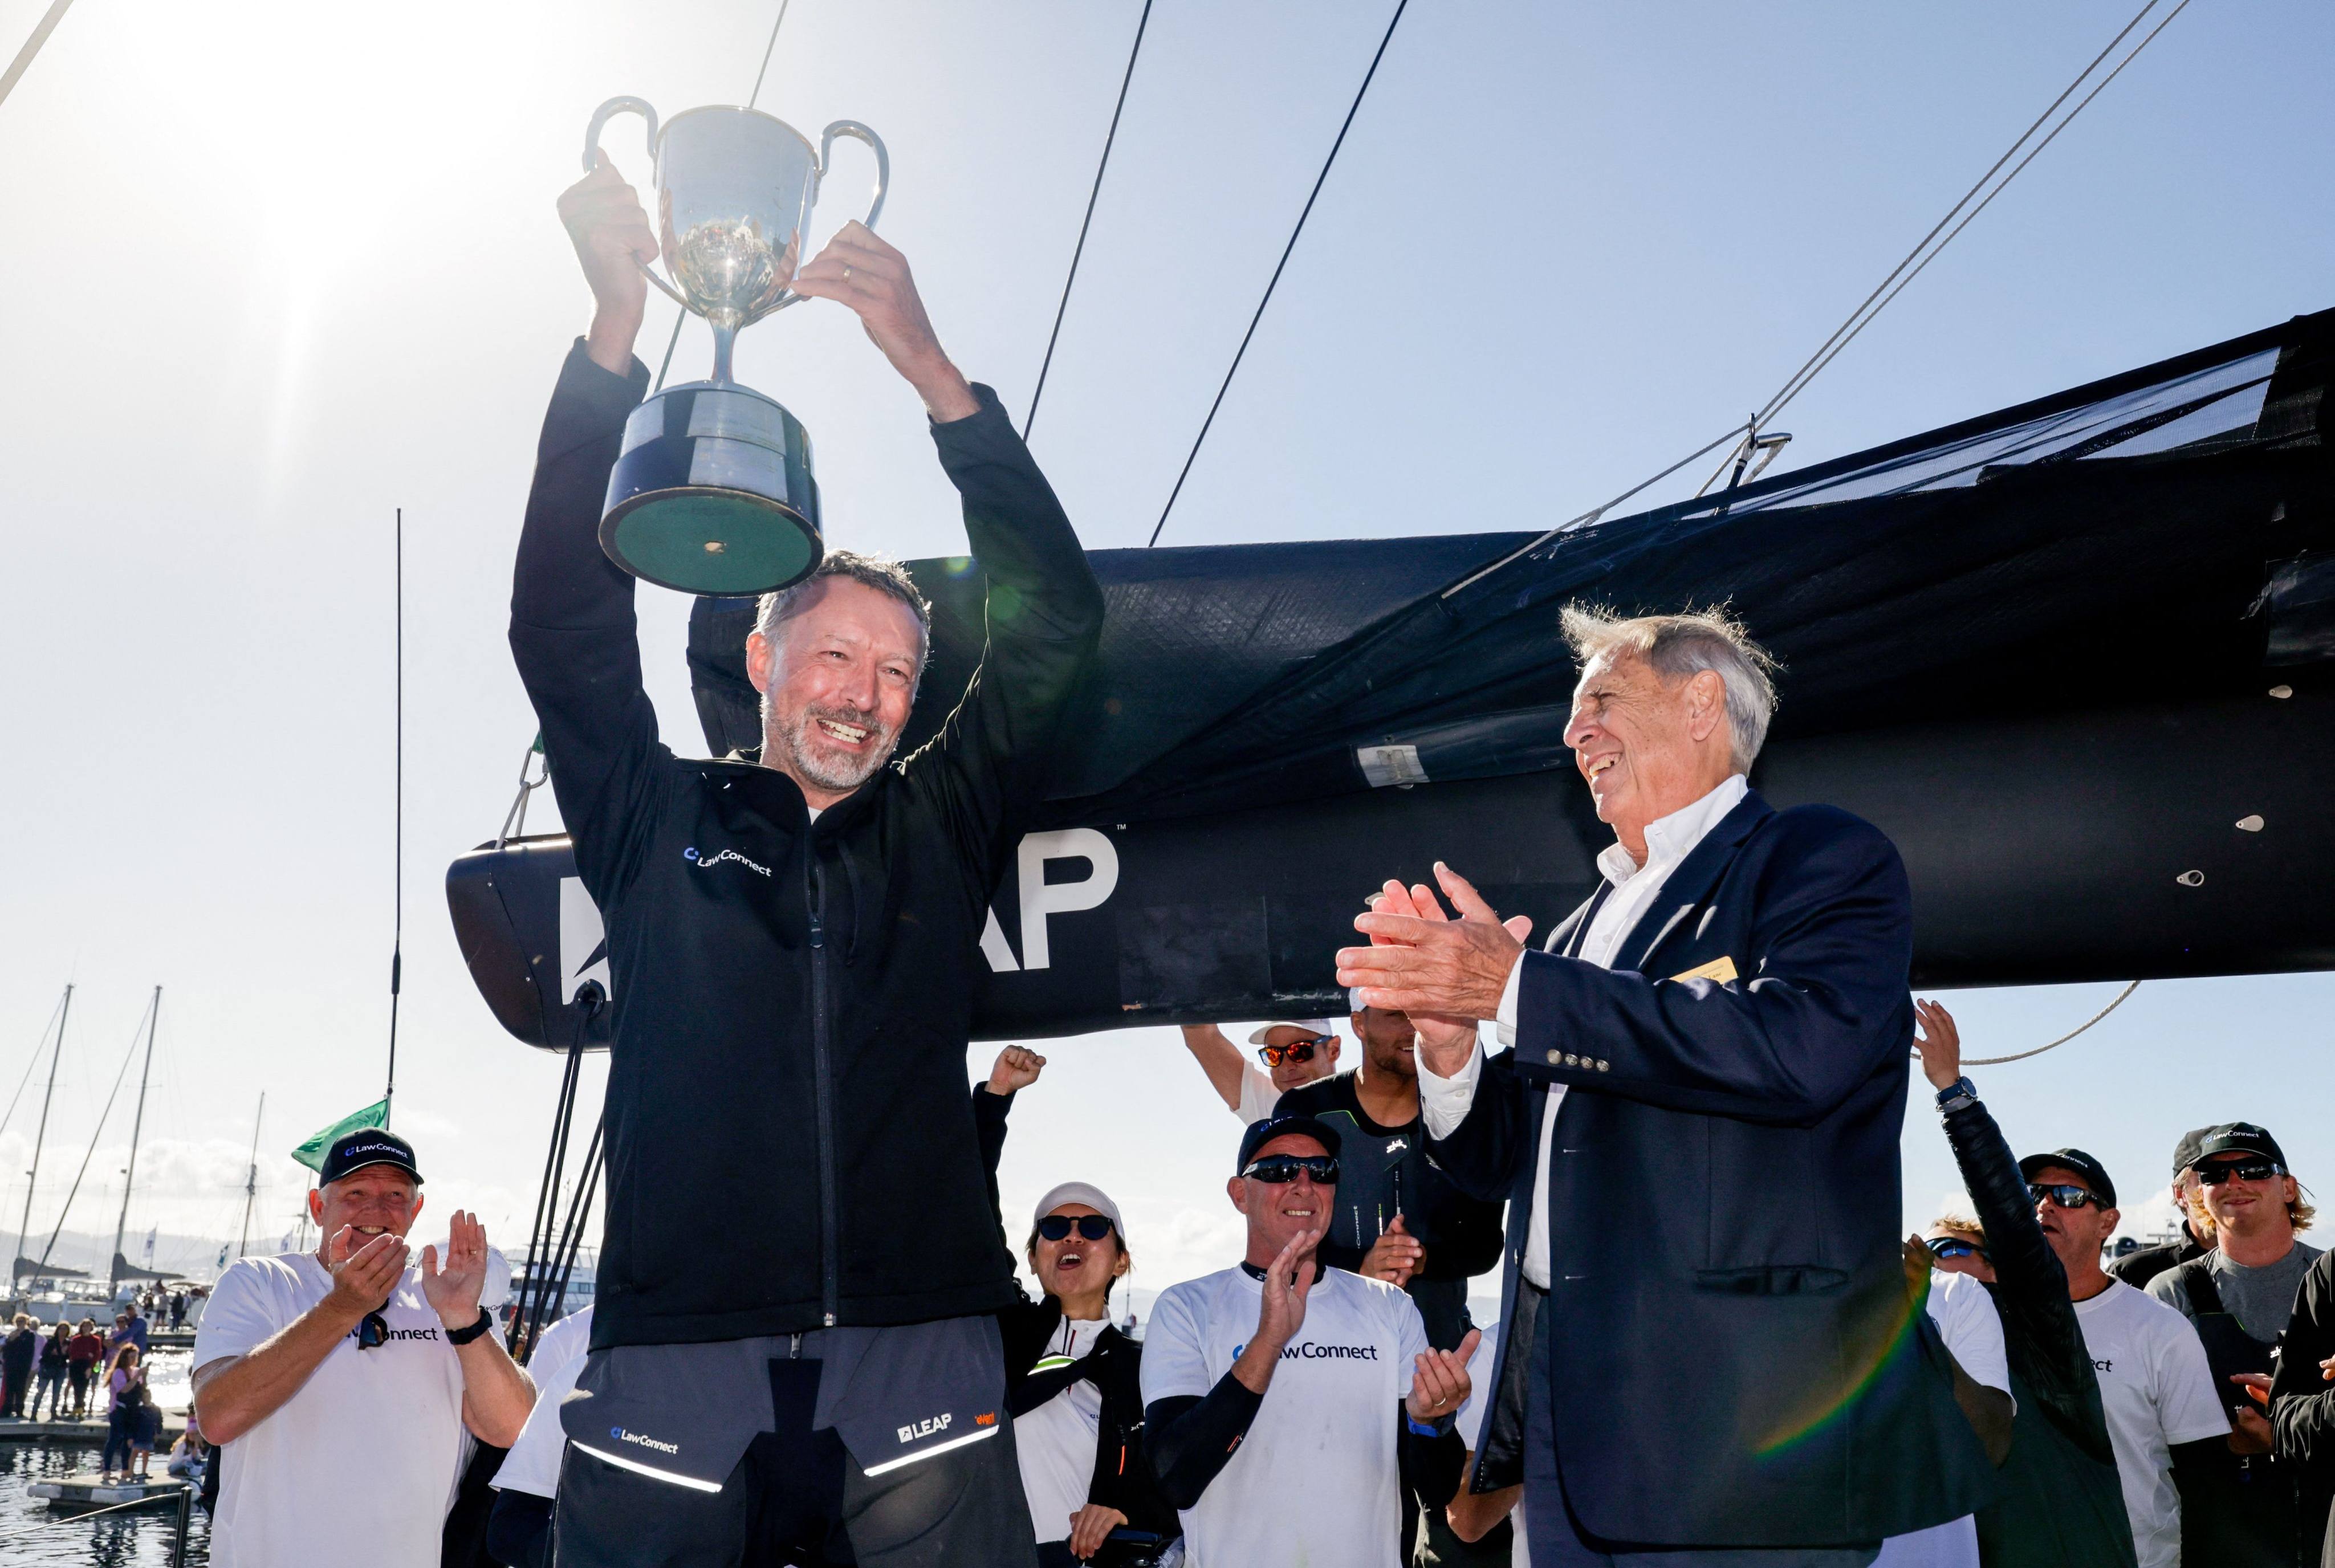 Christian Beck skipper and owner of LawConnect, lifts the John H. Illingworth Challenge Cup after being handed the trophy by Arthur Lane (right), the Commodore of the Cruising Yacht Club of Australia. Photo: AFP PHOTO/SALTY DINGO